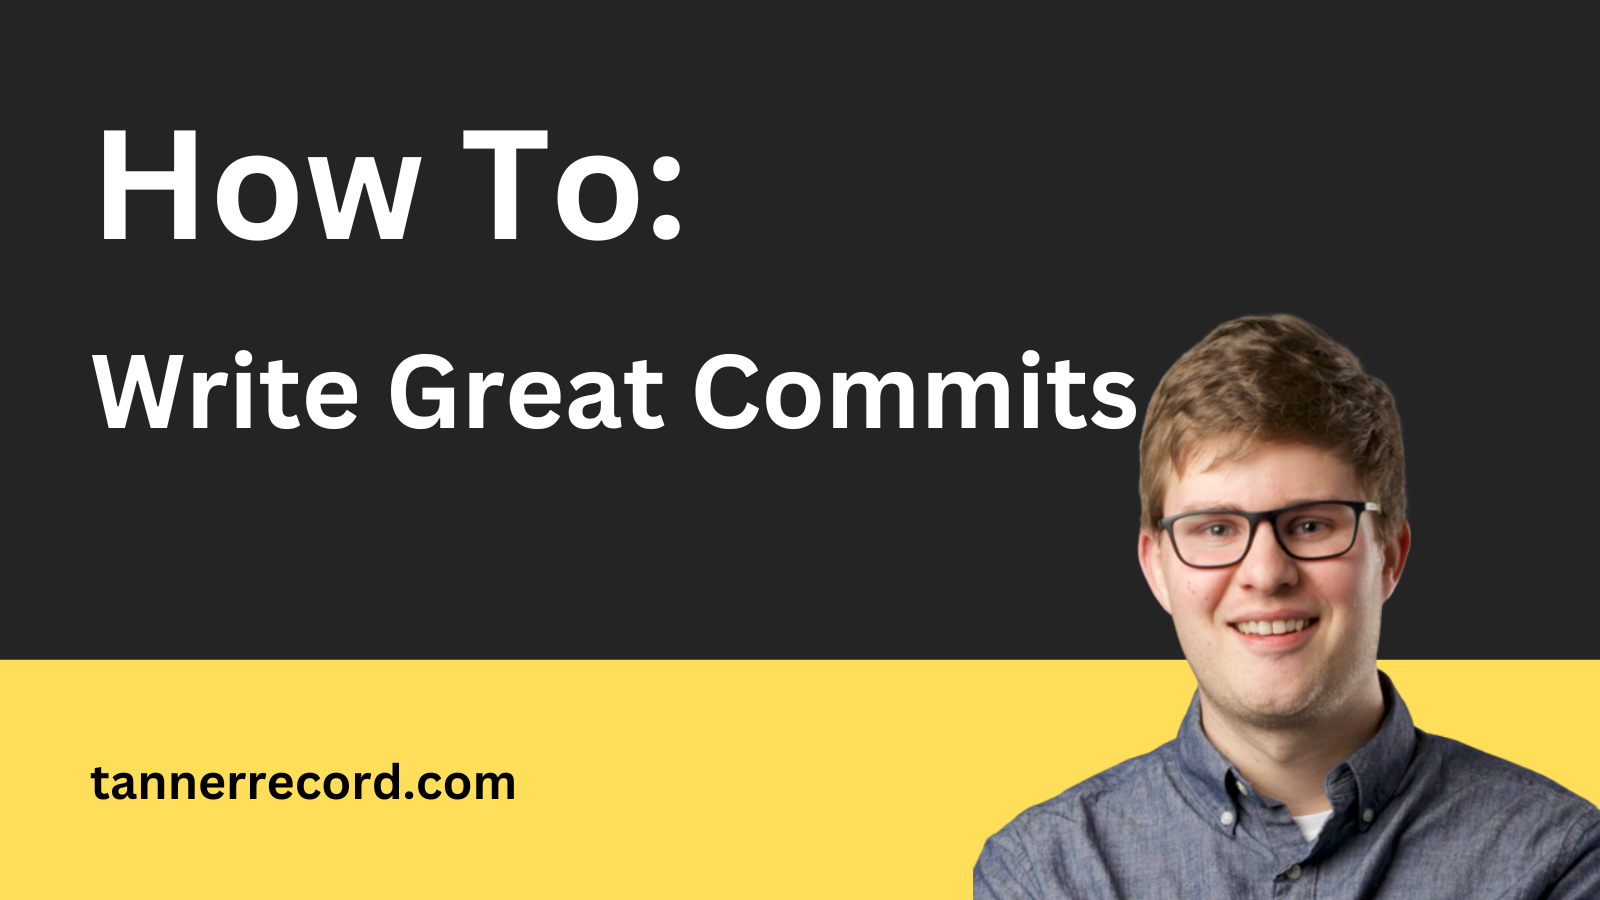 How to Write Great Commits